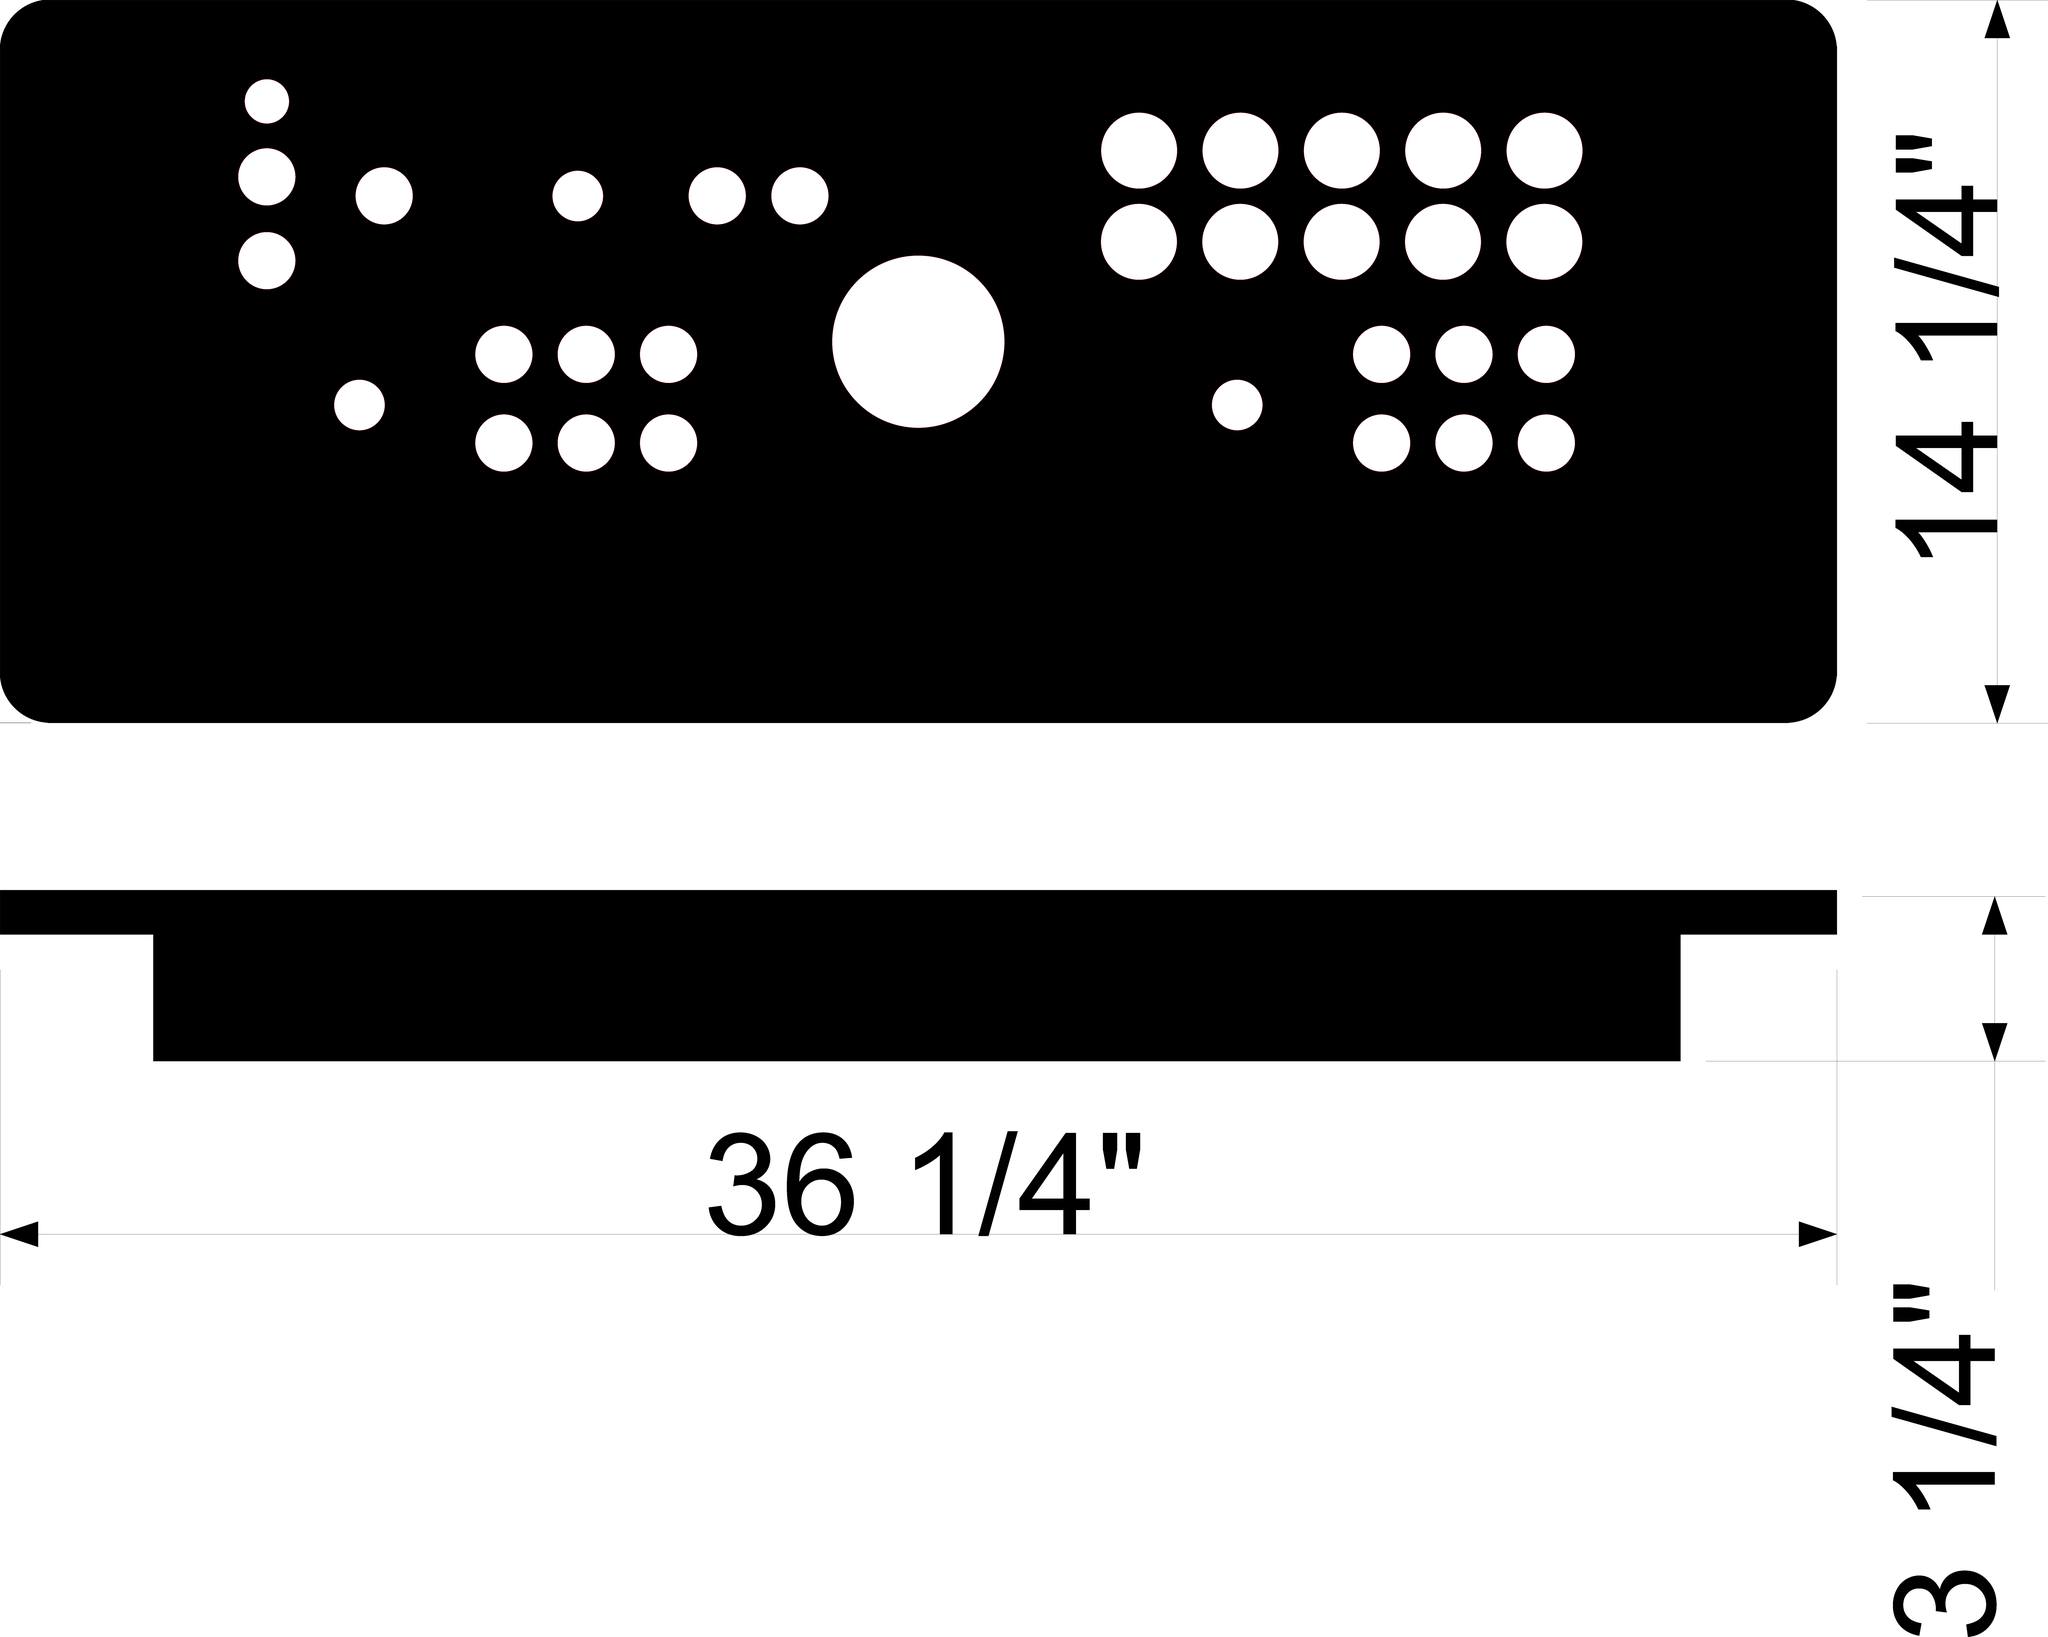 Controller dimensions